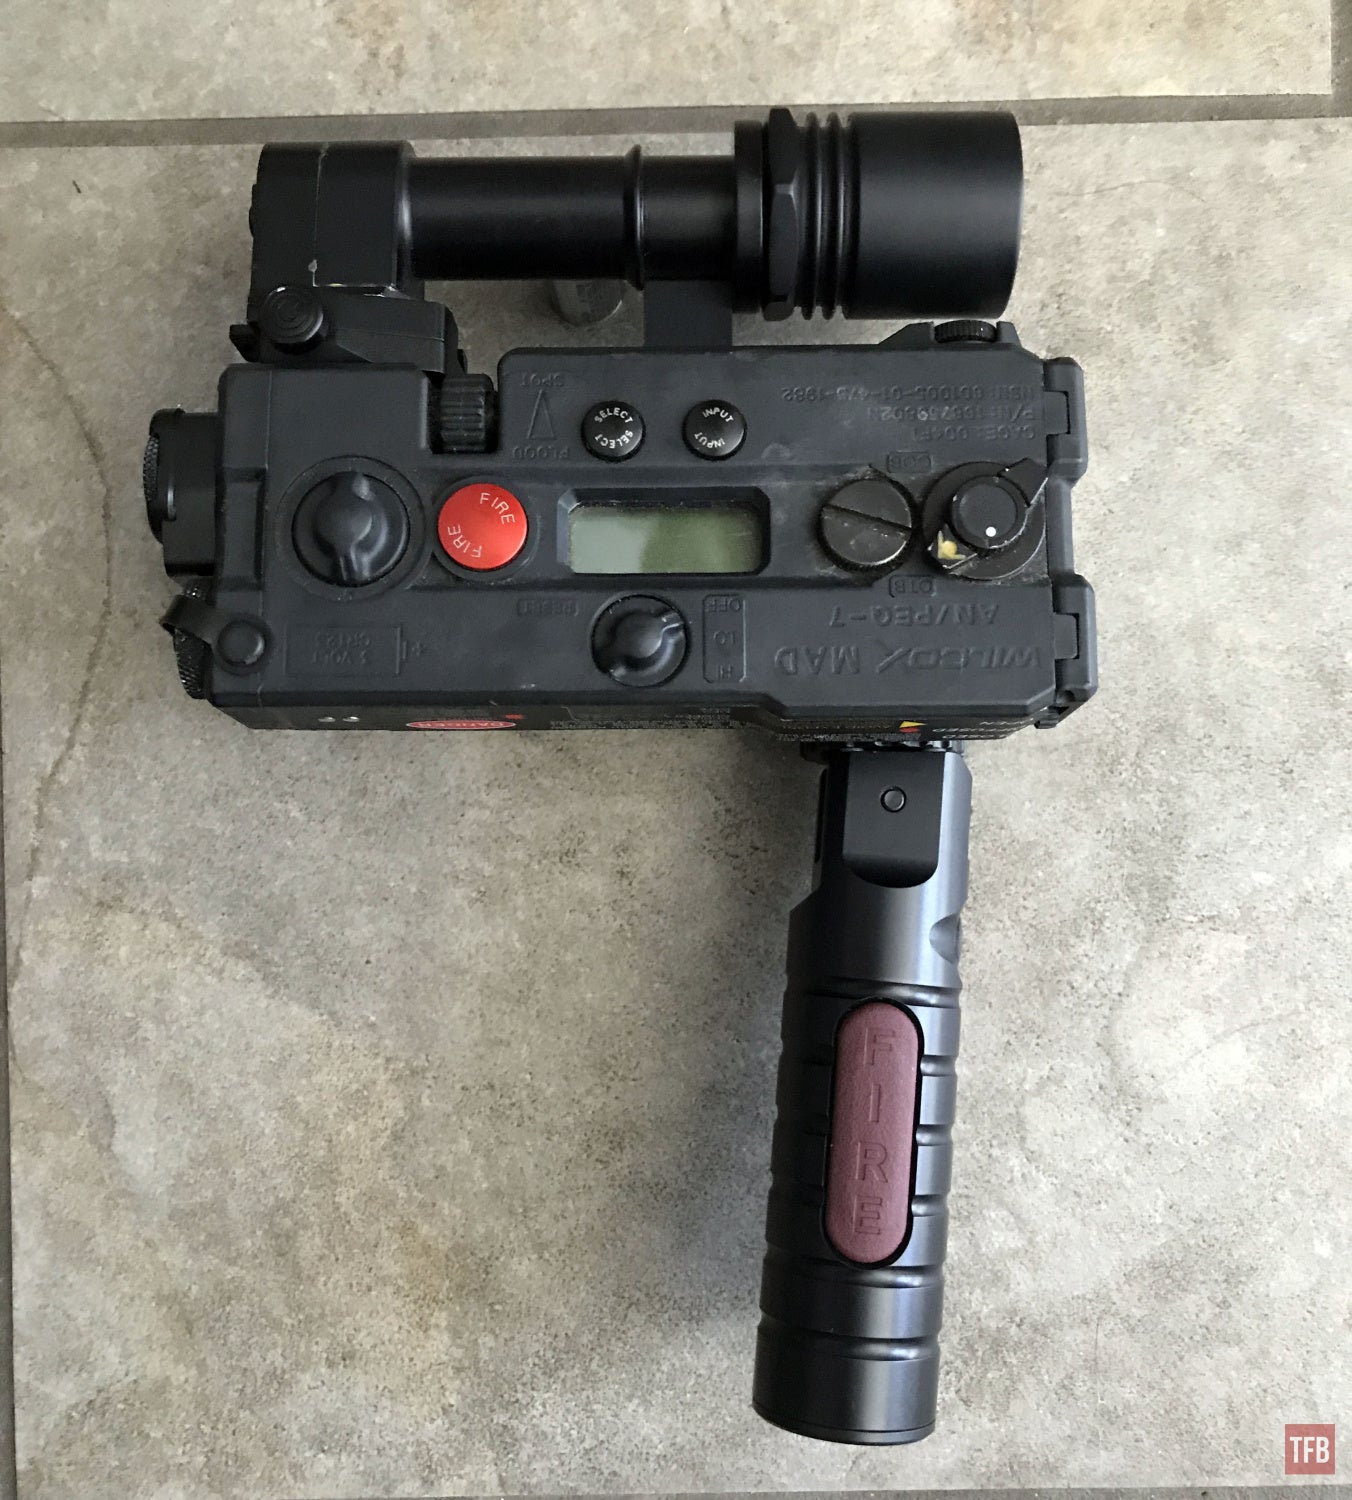 PEQ-7 mounted onto the MAD Grip